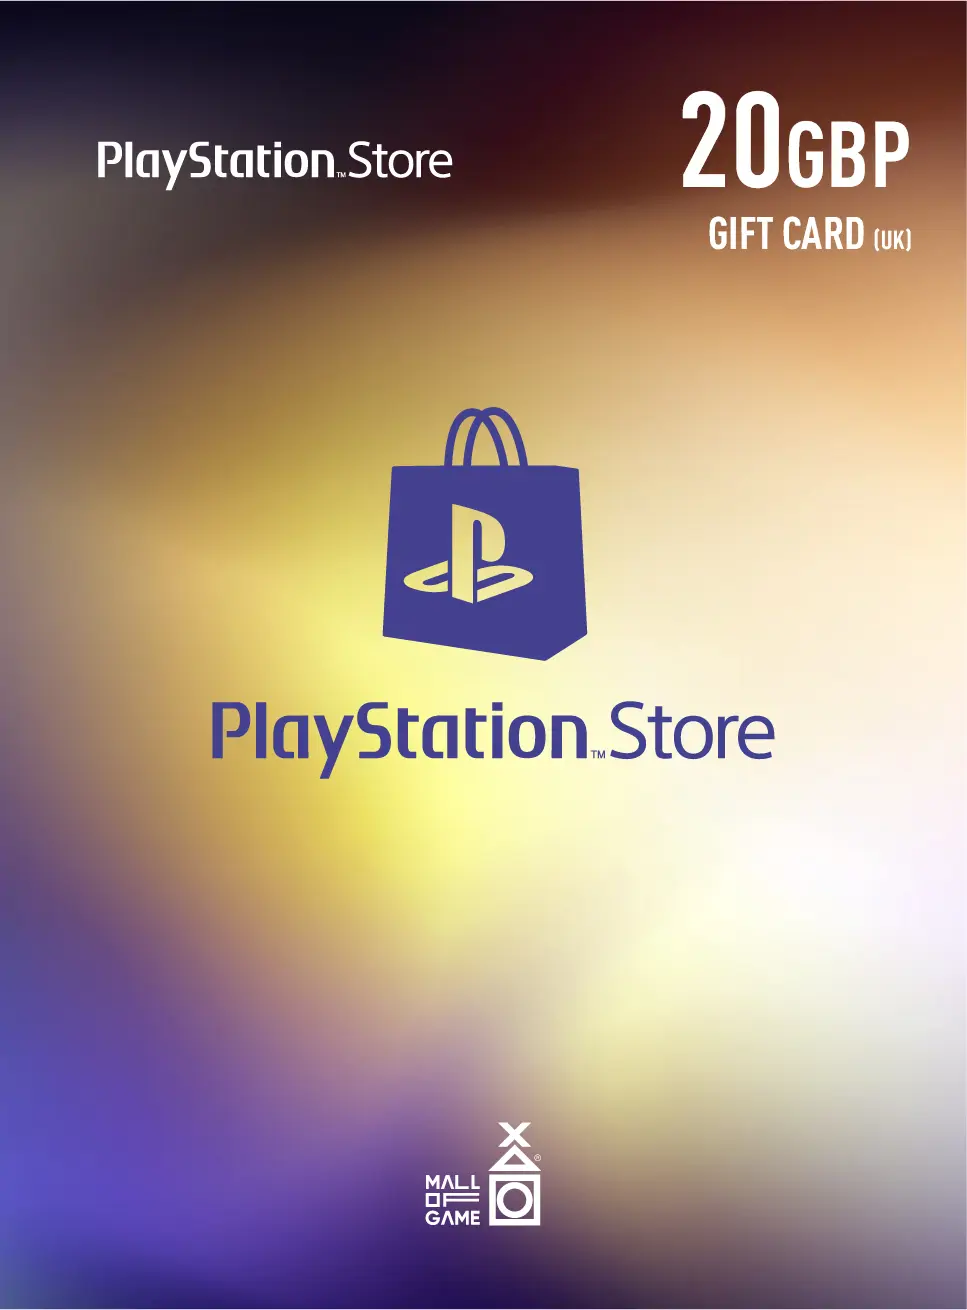 PlayStation™Store GBP20 Gift Cards (UK)